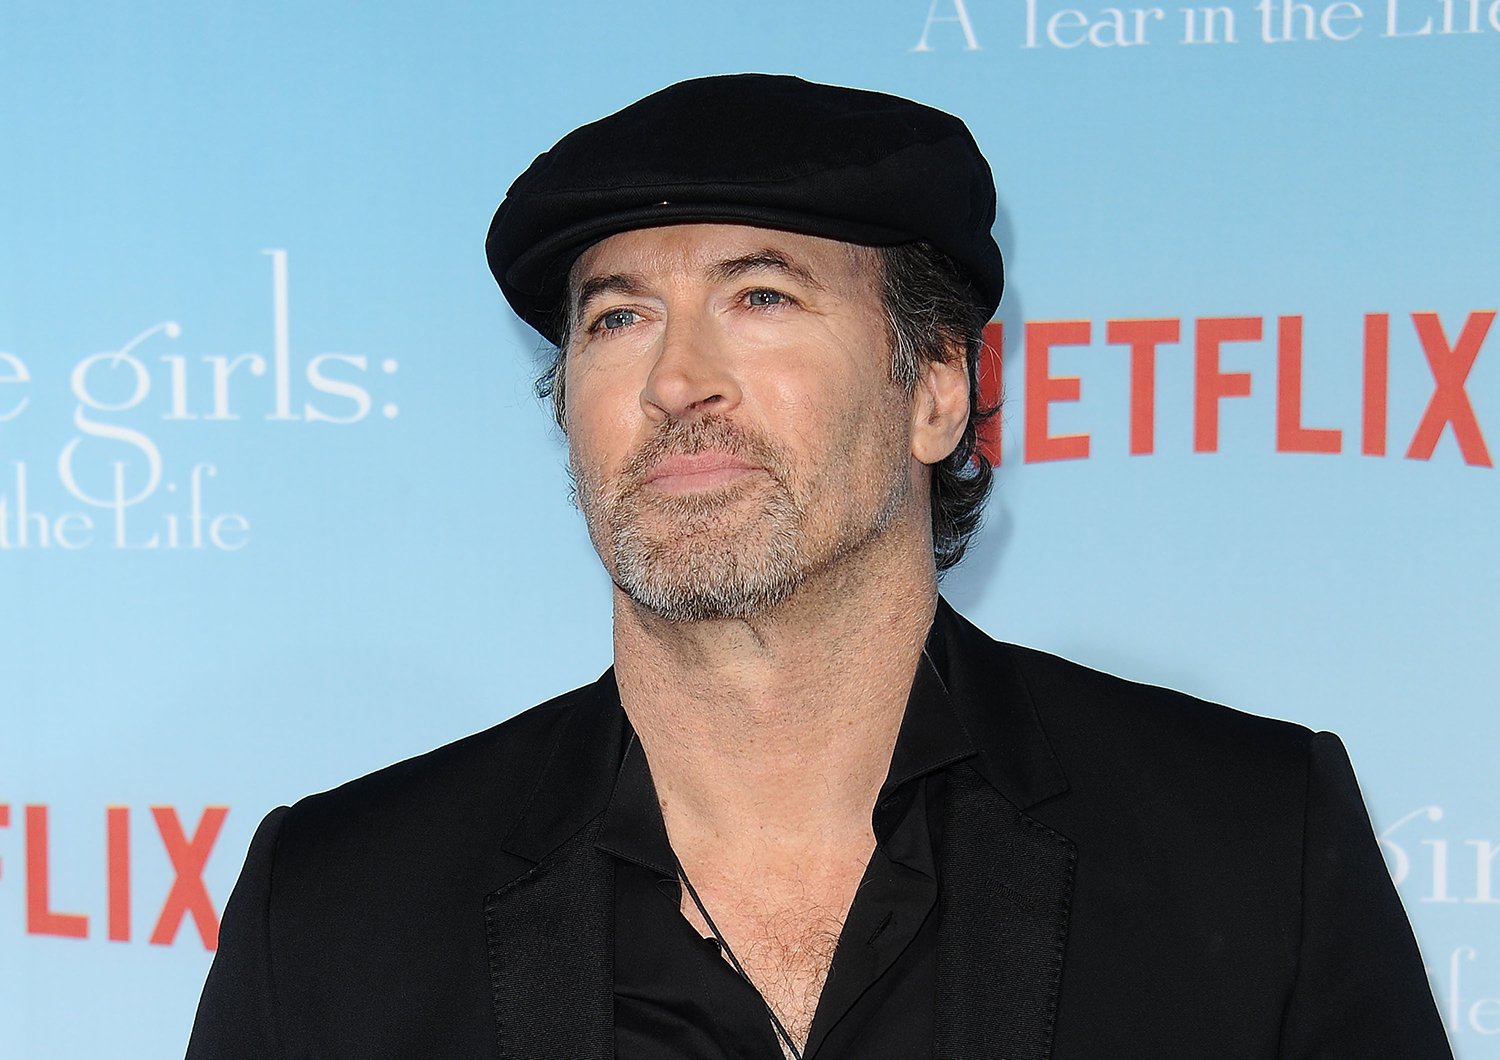 Scott Patterson at the 'Gilmore Girls: A Year in the Life' premiere in 2016